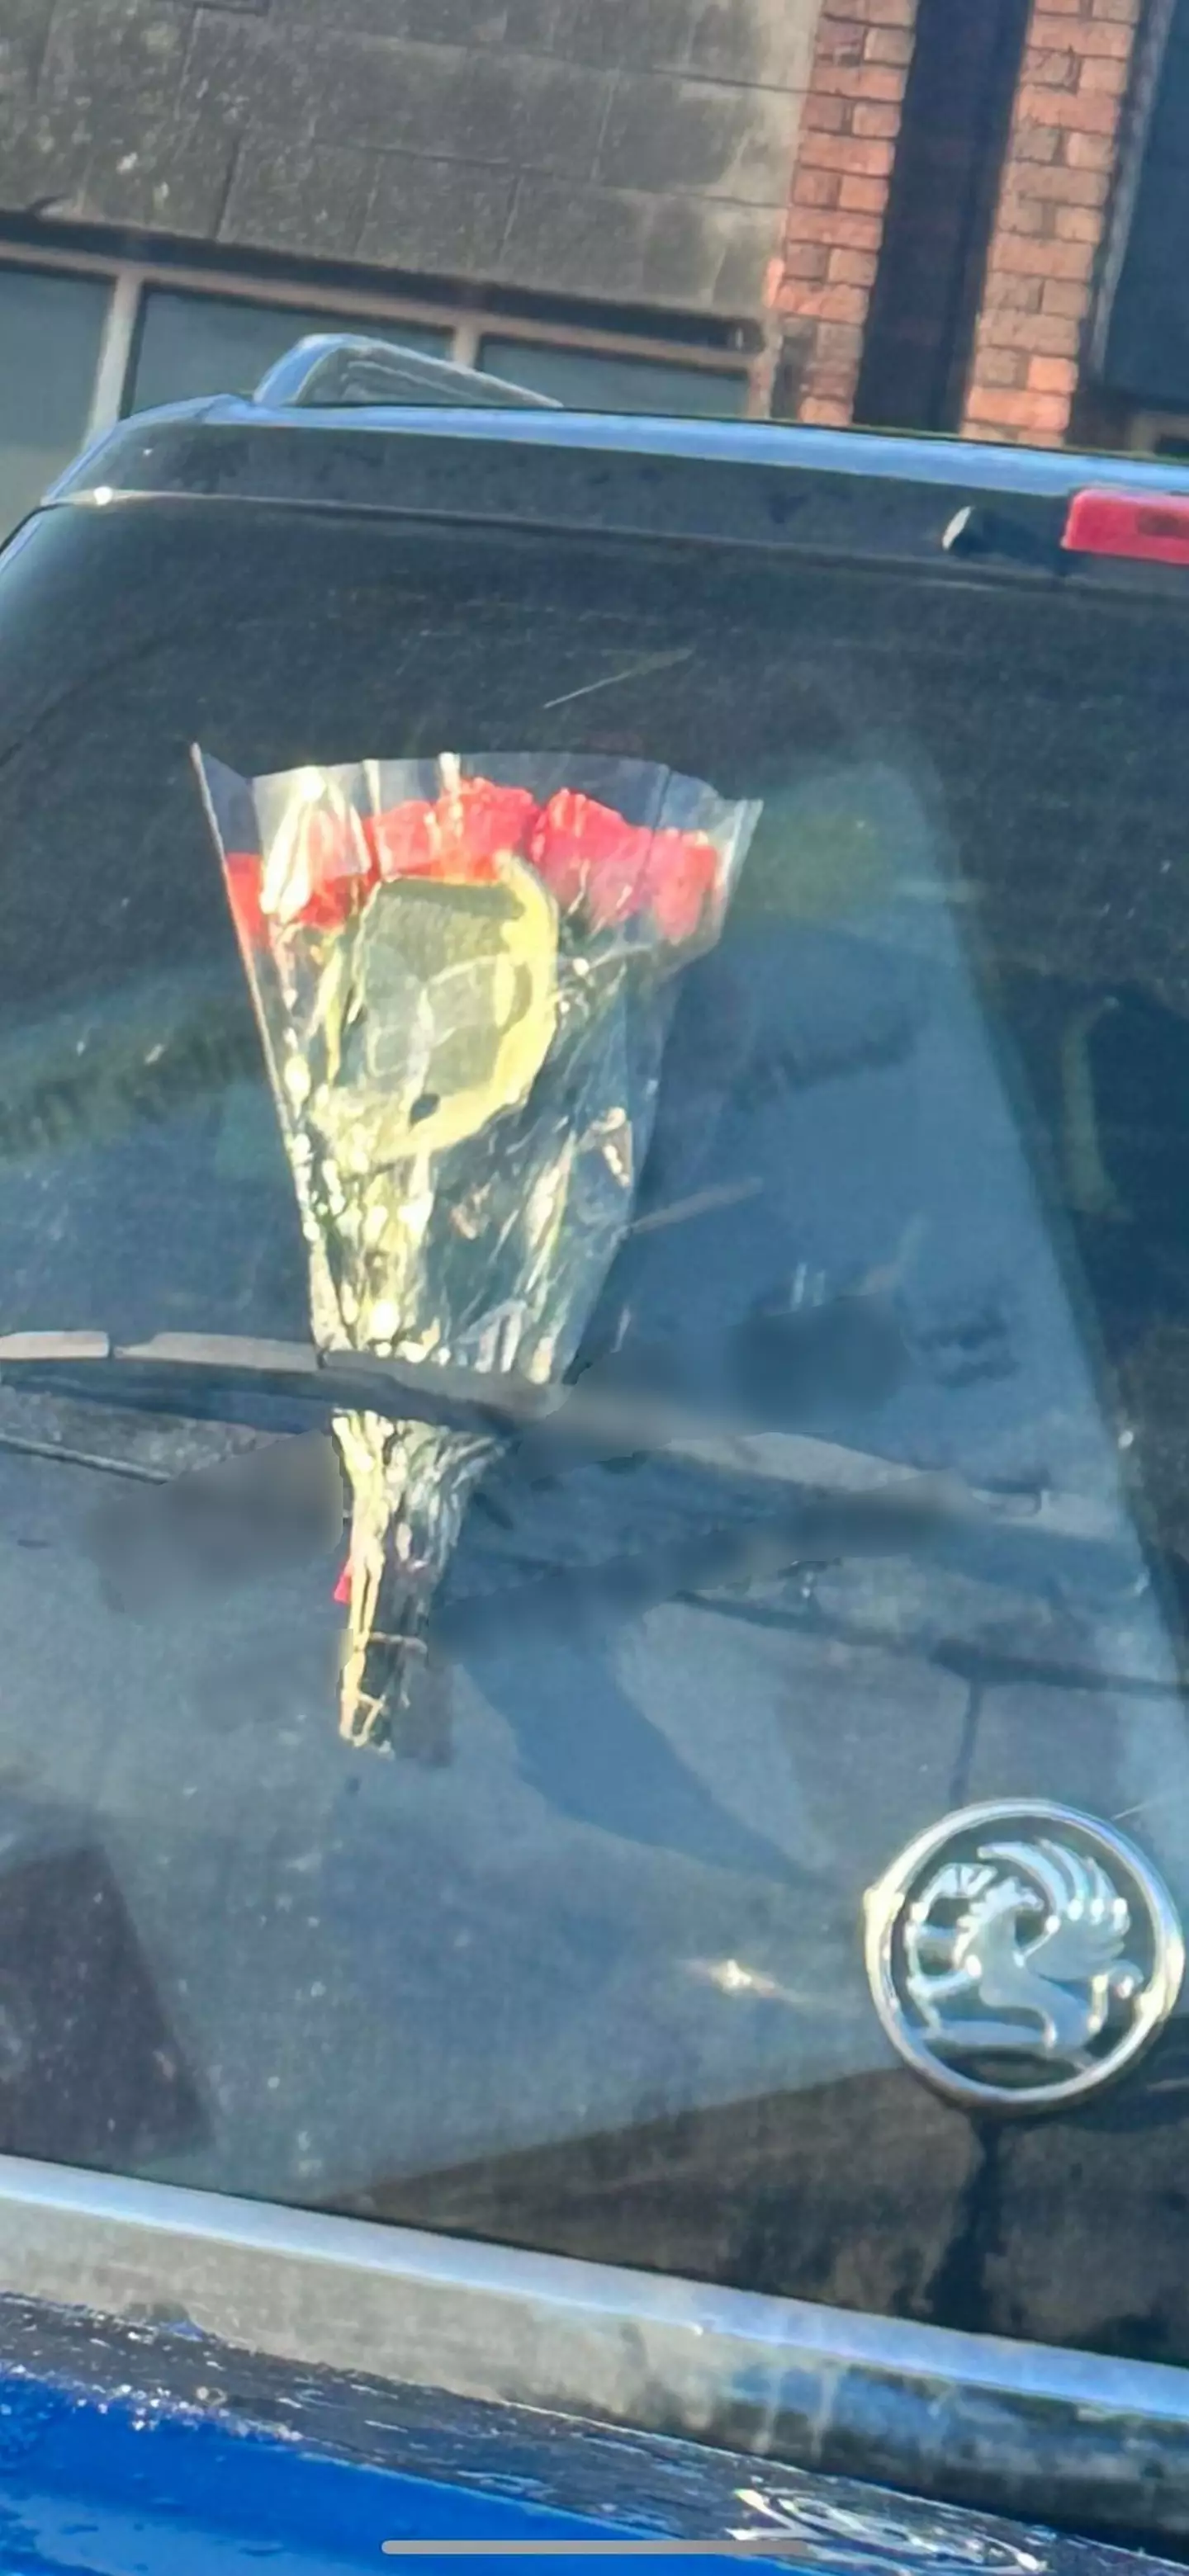 Abbie regrets leaving flowers on the car.